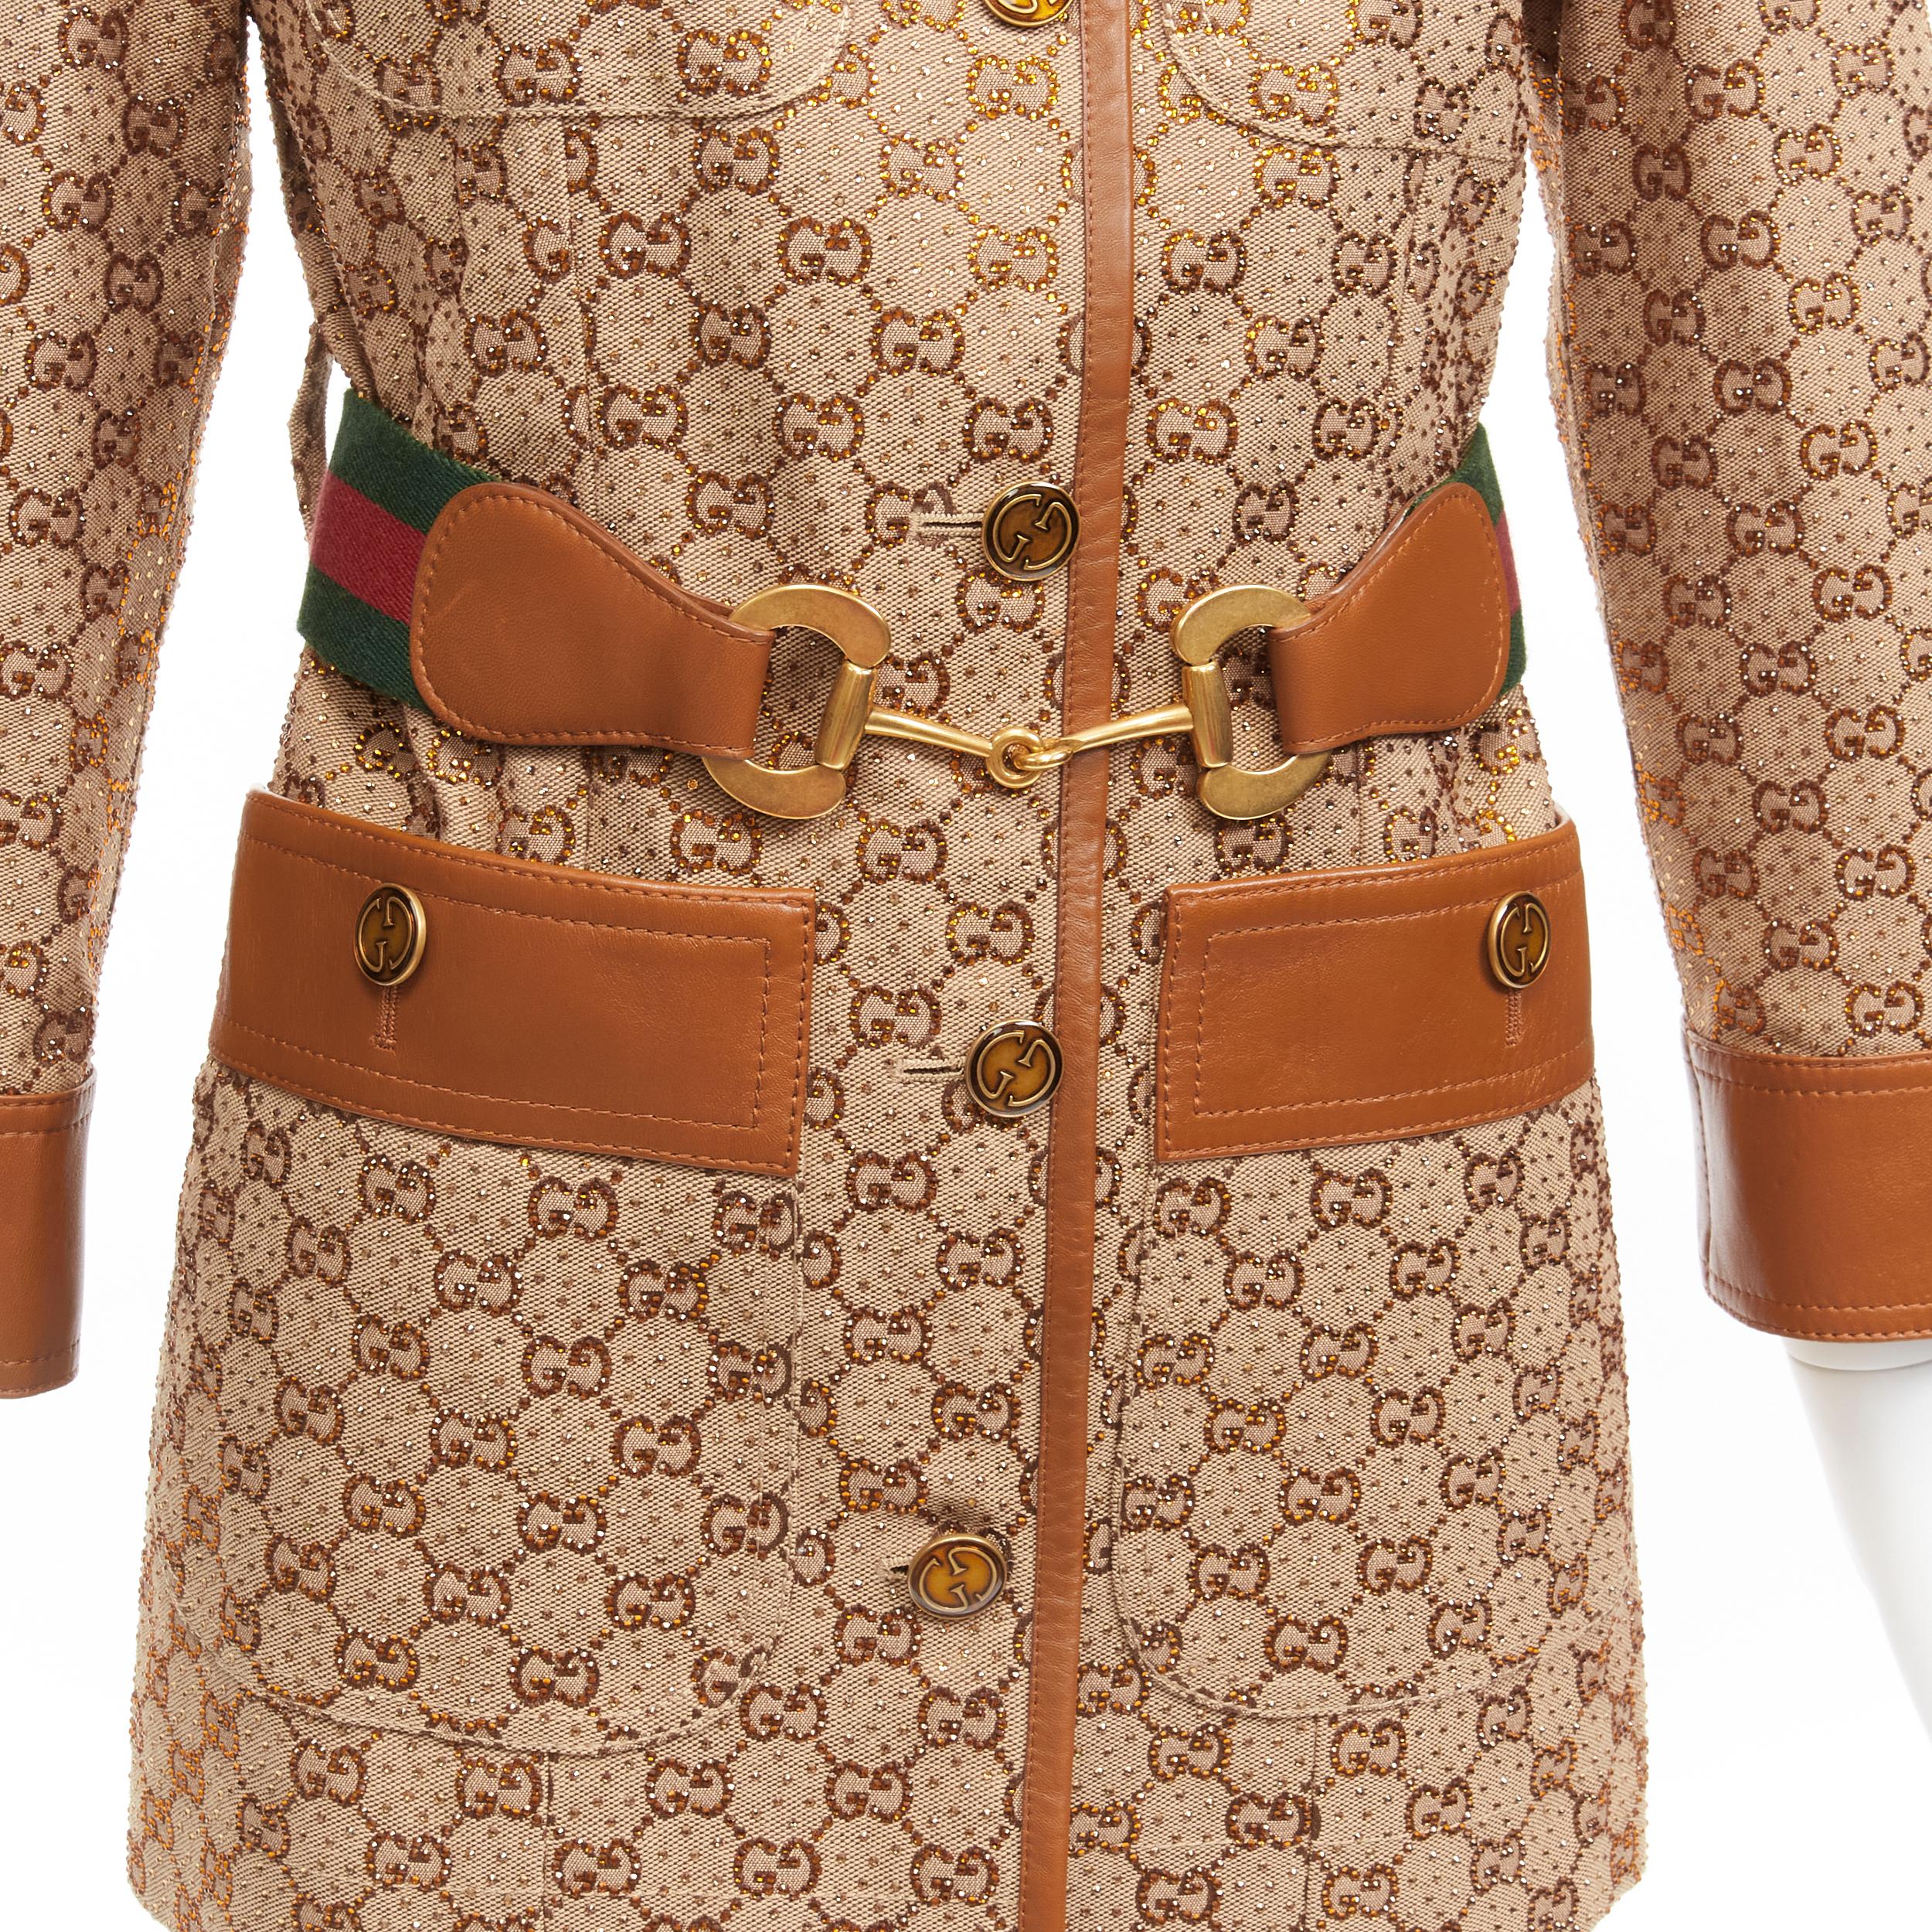 GUCCI 2022 Aria crystal embellished Horsebit web belt leather trimmed GG canvas jacket IT38 XS
Reference: AAWC/A00487
Brand: Gucci
Designer: Alessandro Michele
Model: Aria
Collection: 2022
Material: Cotton, Leather
Color: Brown, Yellow
Pattern: